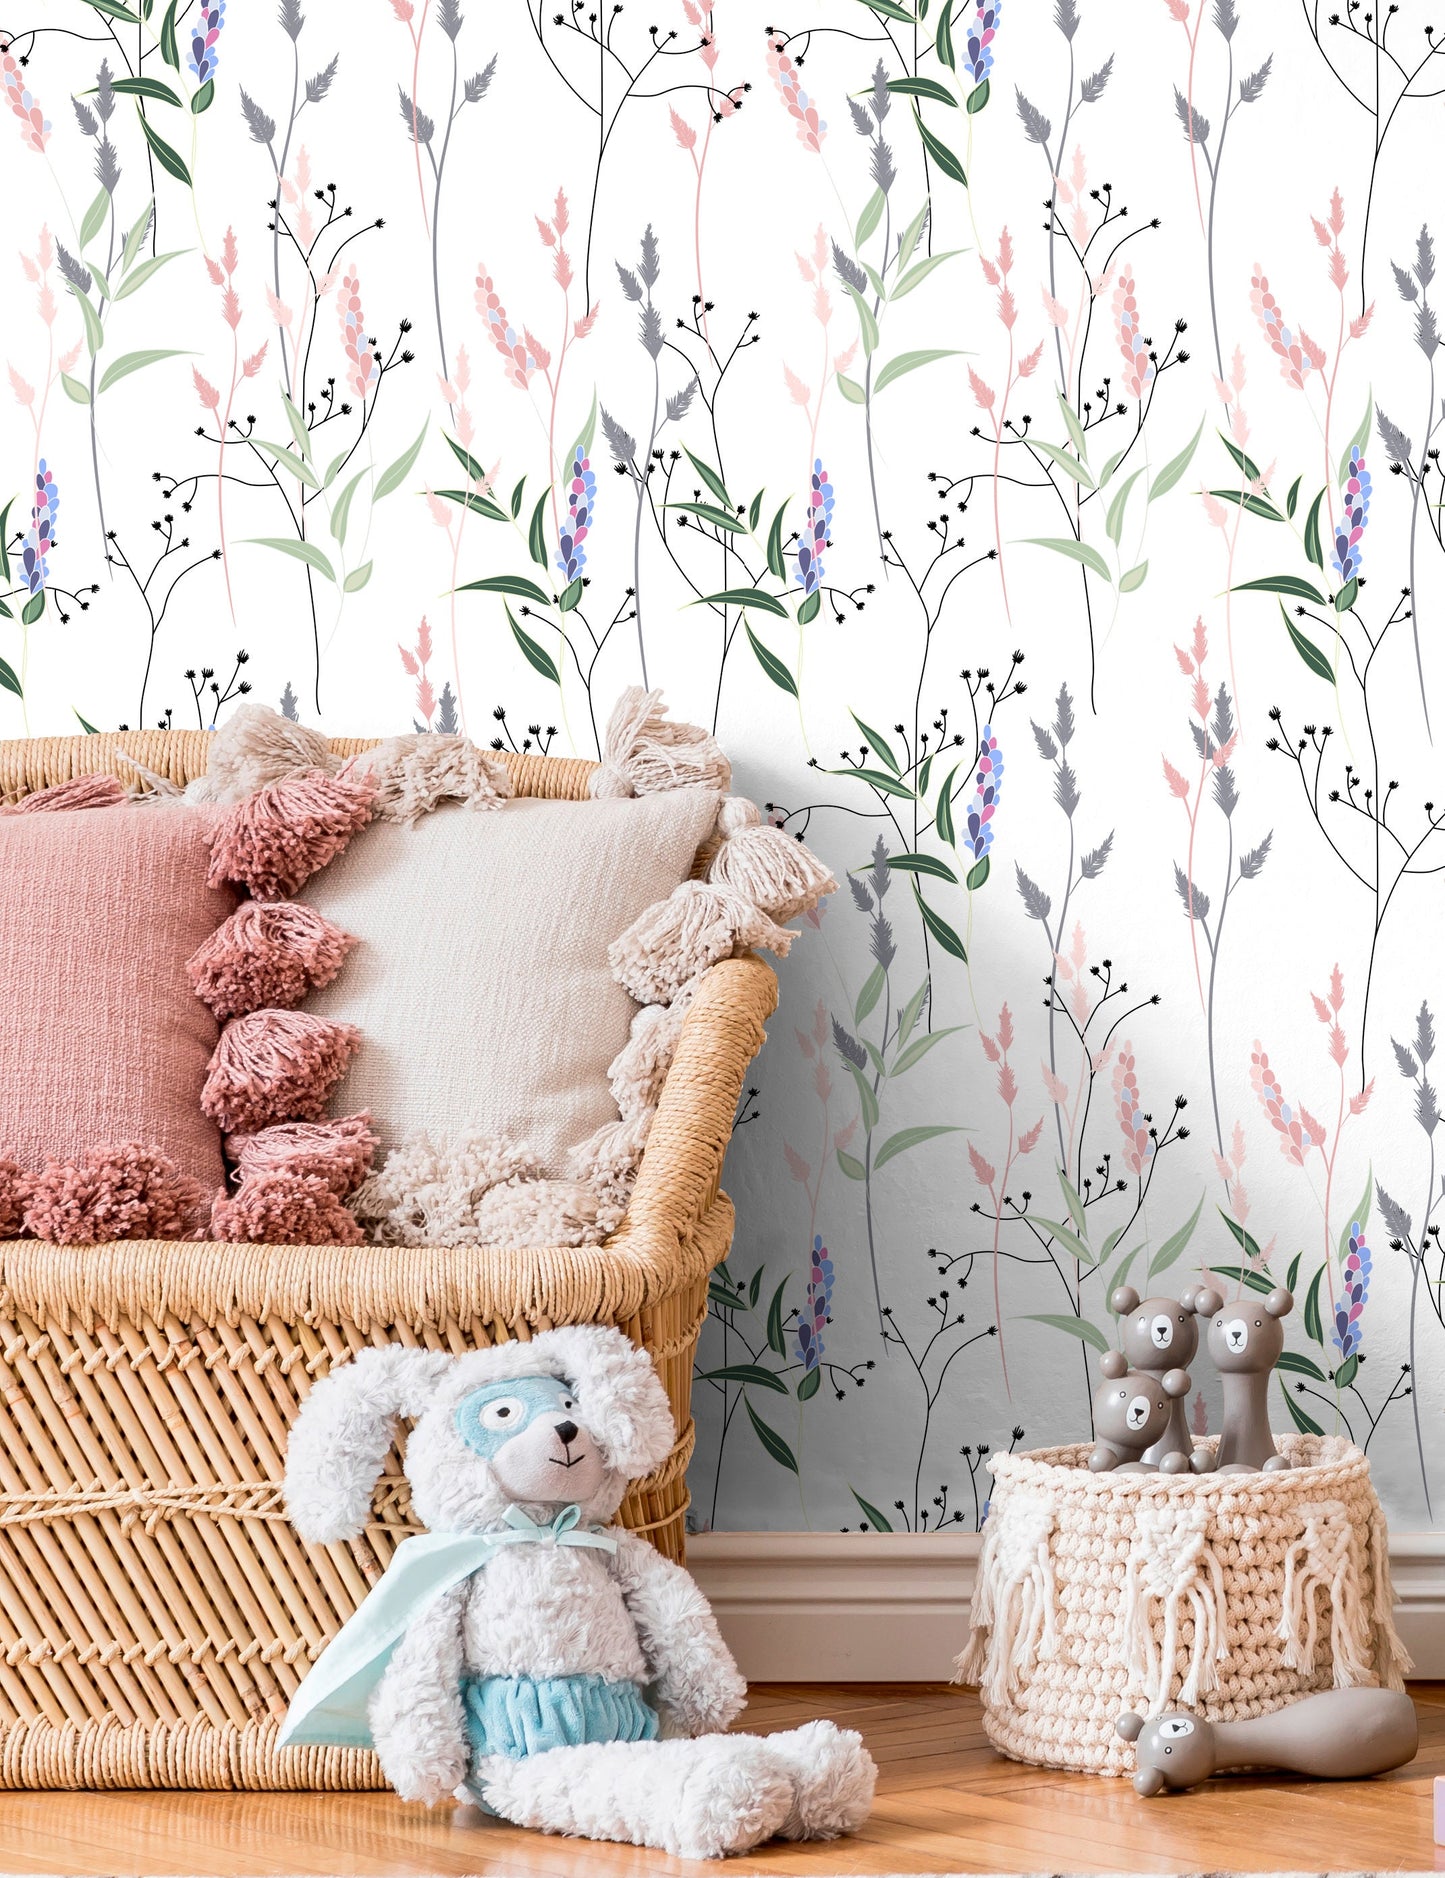 Cute Flowers Removable Wallpaper Peel and Stick Wallpaper Wall Paper - B315